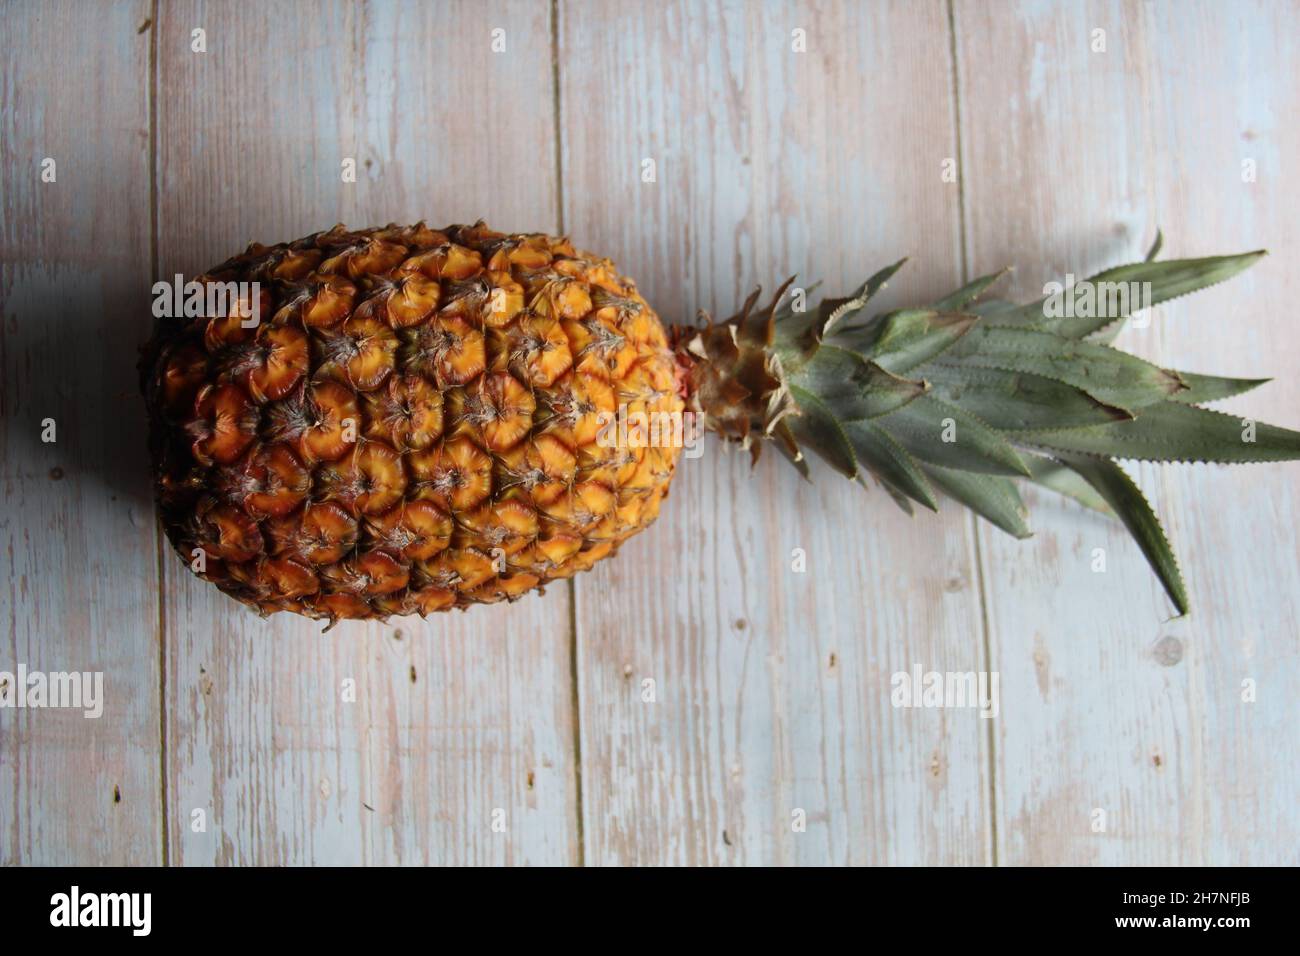 Hawaiian pineapple, isolated, on an old wooden table, Top view. Stock Photo